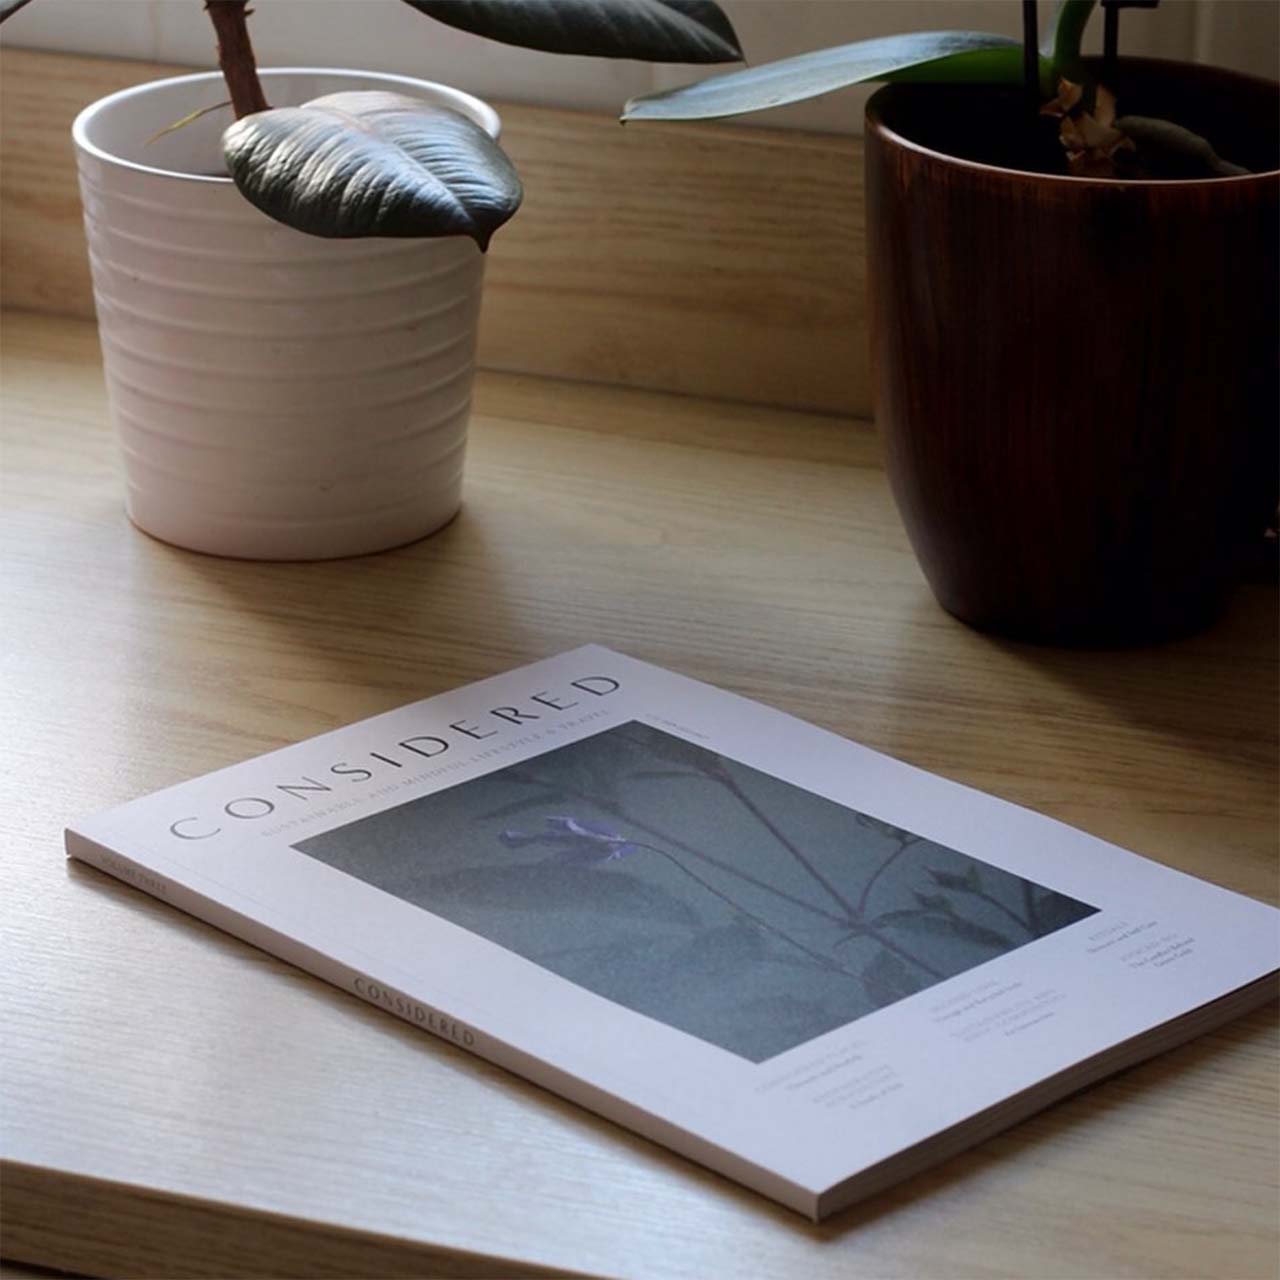 a copy of considered magazine on a wooden table with a plant next to it